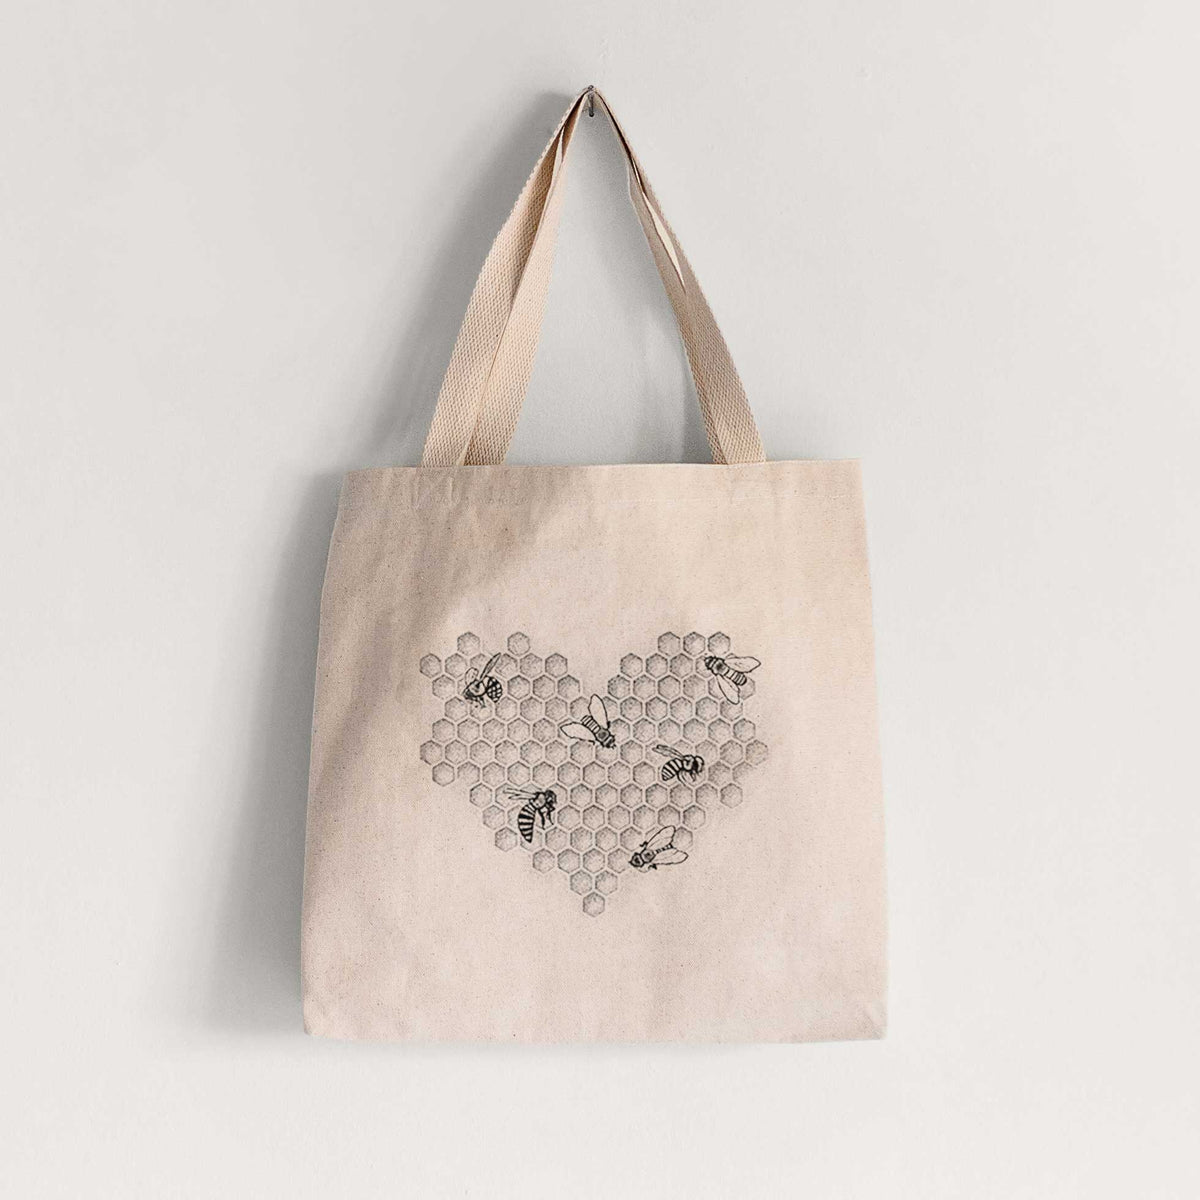 Honeycomb Heart with Bees - Tote Bag